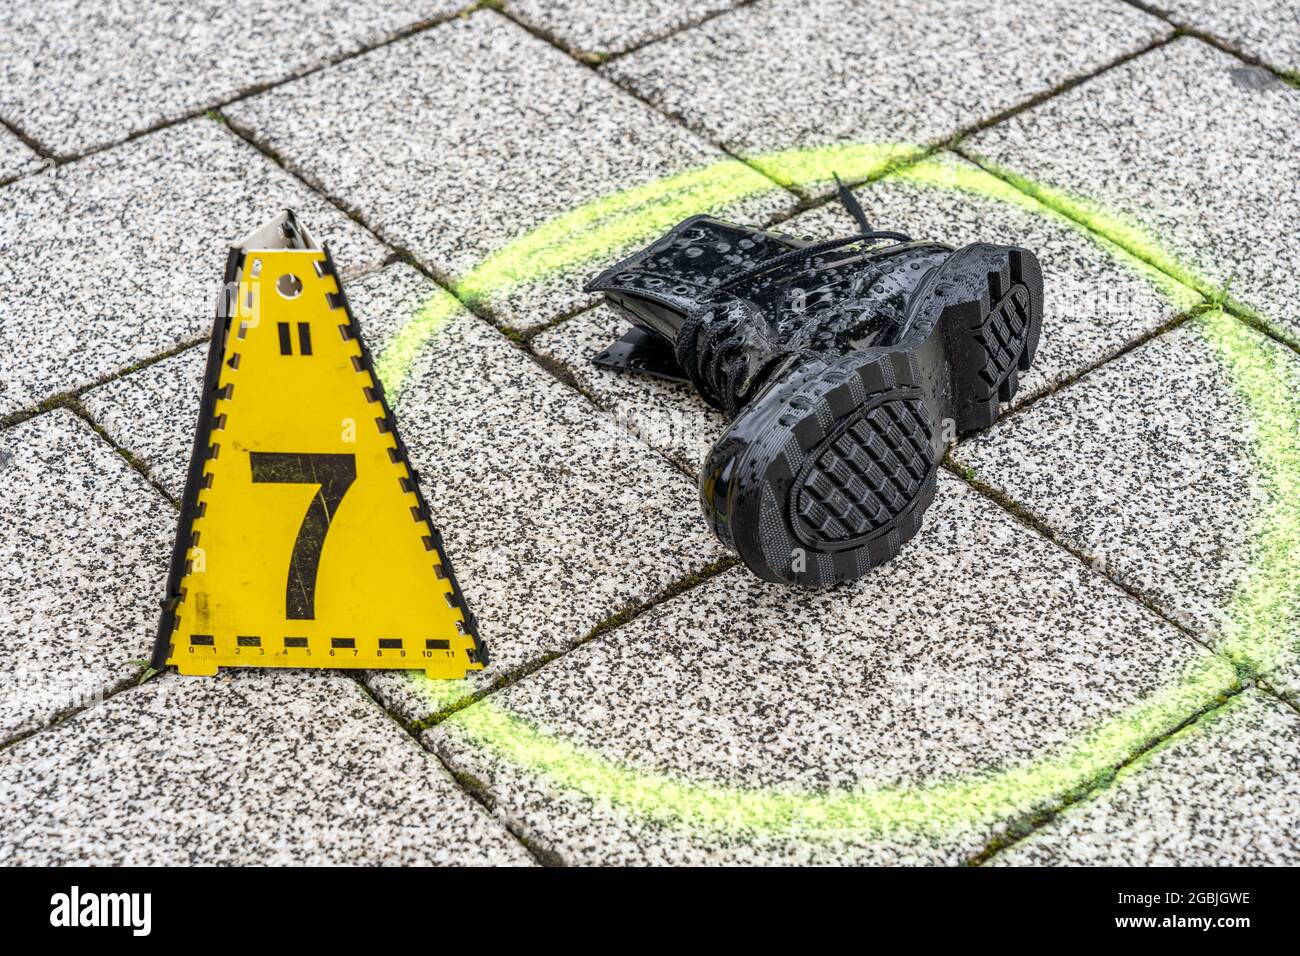 Re-enacted, fatal, accident with a passenger car and a cyclist, at the police NRW, accident investigation by specialized VU teams, traffic accident te Stock Photo